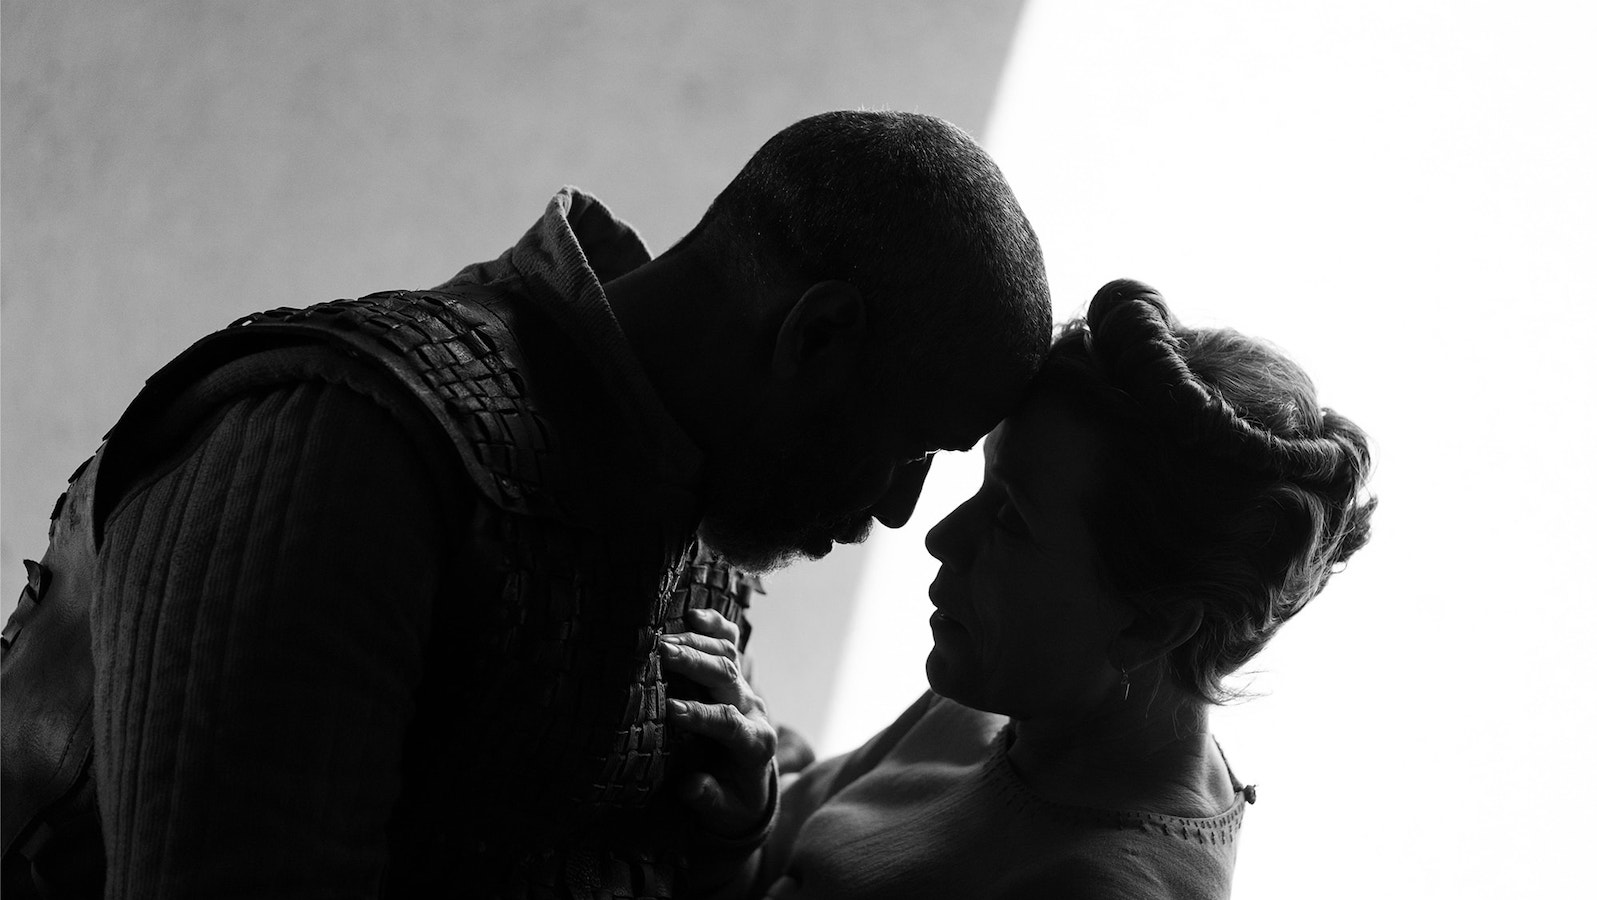 The silhouetted profiles of Macbeth and Lady Macbeth, their foreheads touching intimately.